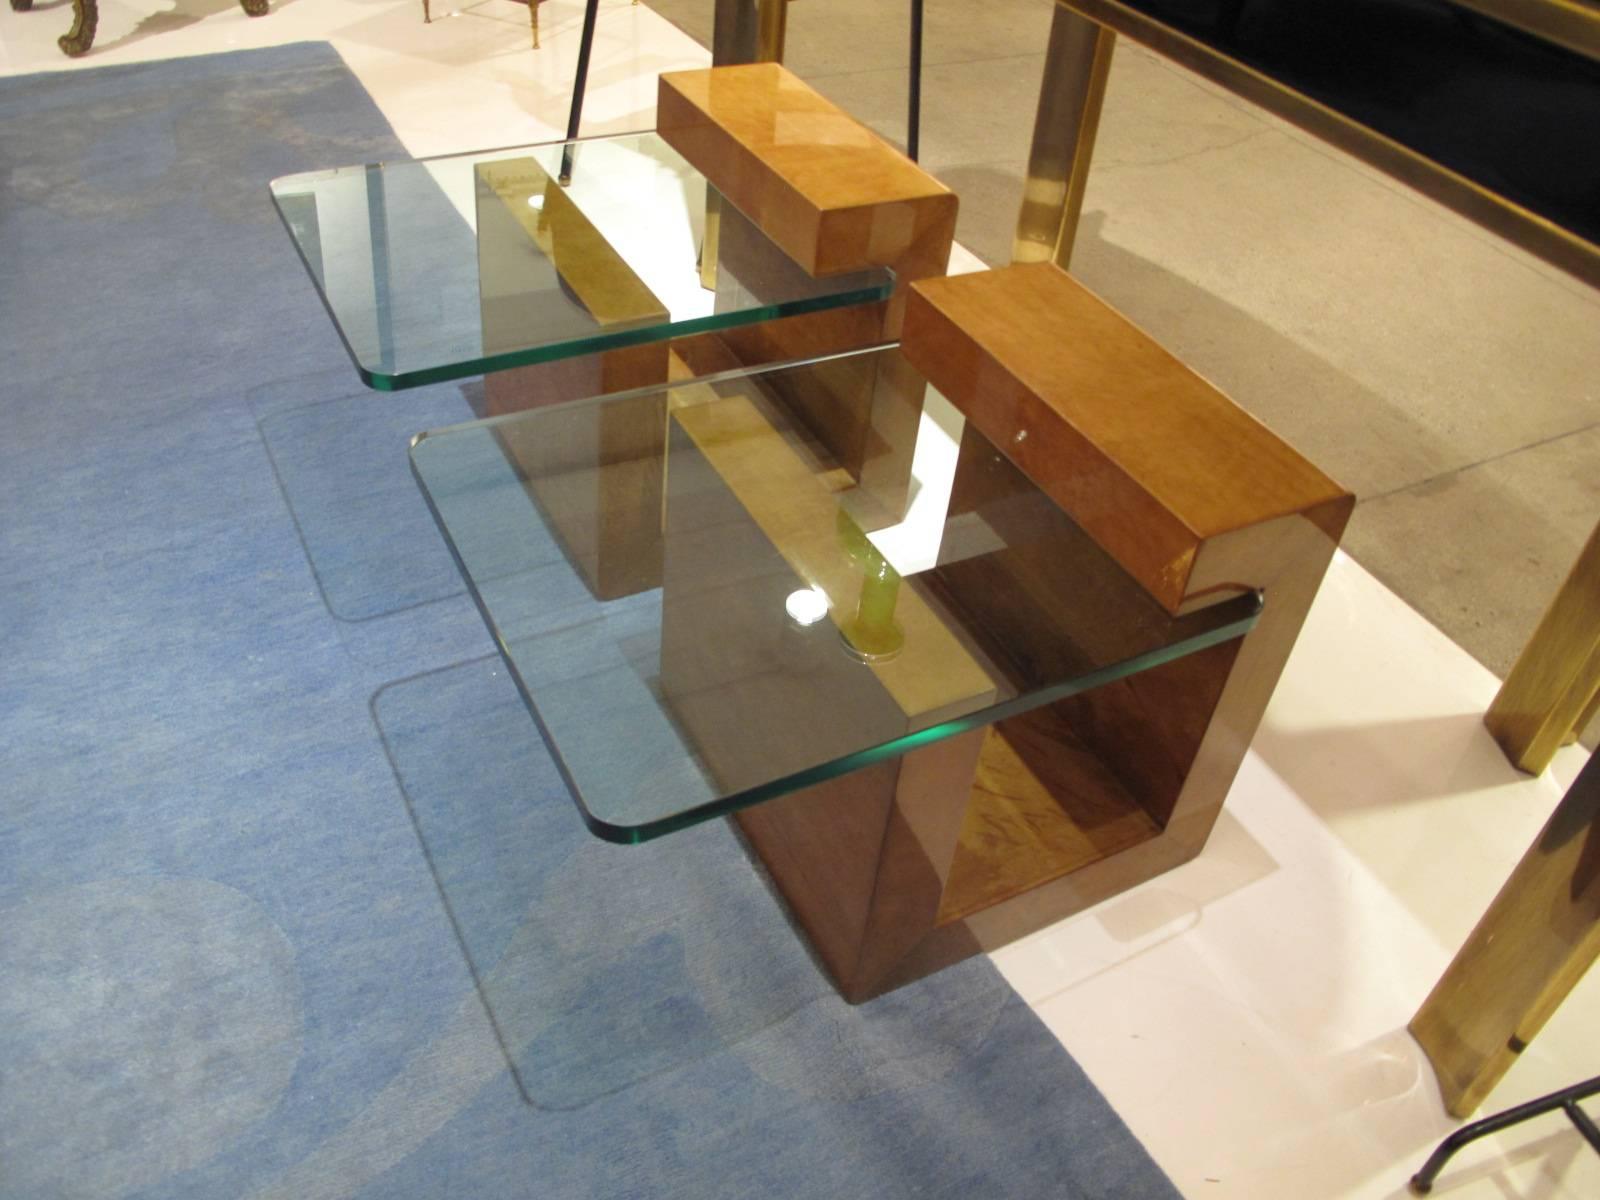 Unusual pair of lacquered parchment side tables by Karl Springer with interlocking glass top.